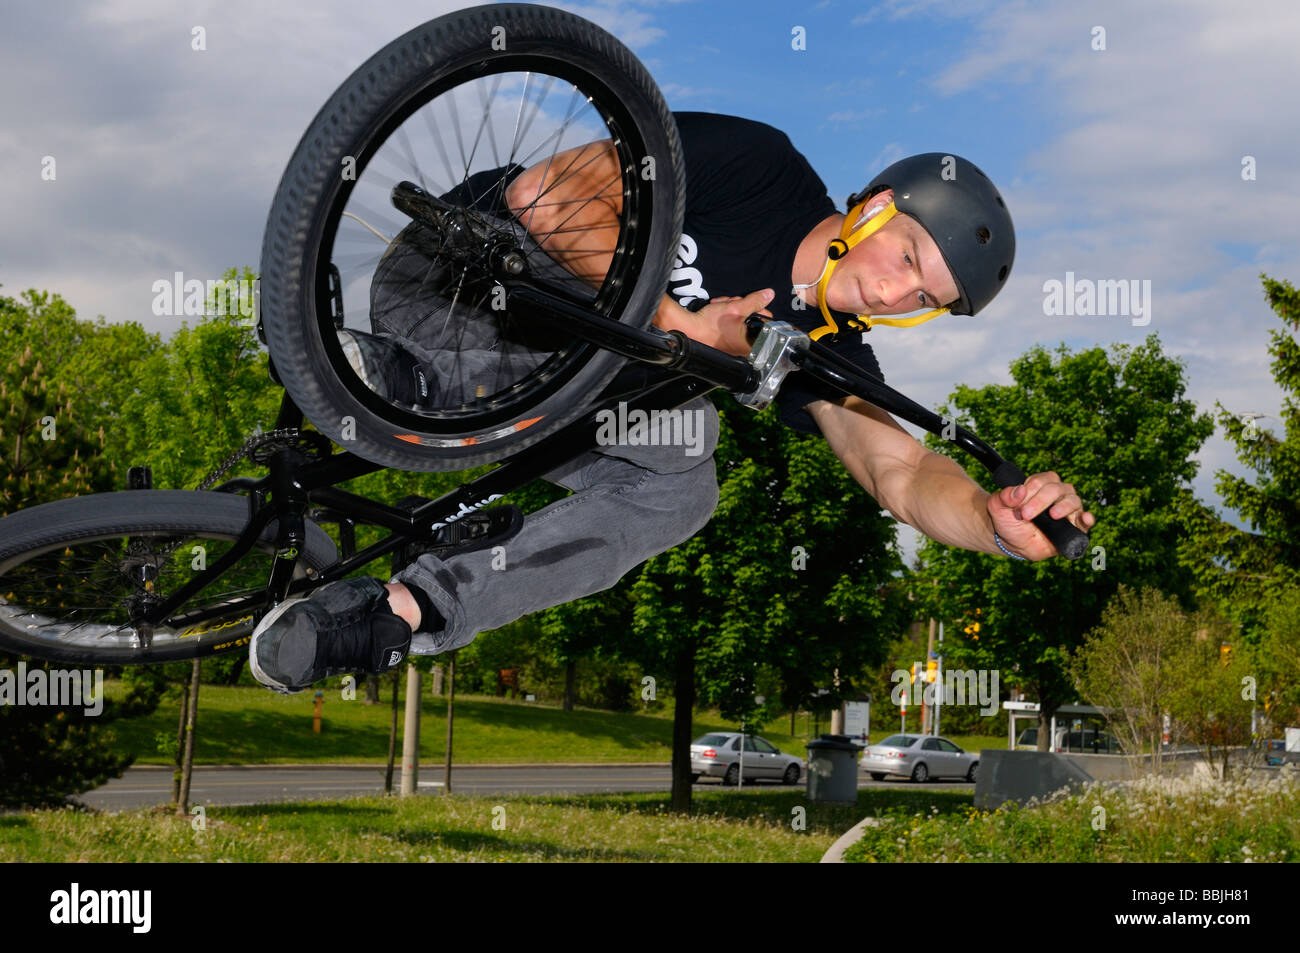 Airborne urban BMX bike rider in an Air Out Tabletop over local traffic at  a Toronto city skatepark Stock Photo - Alamy